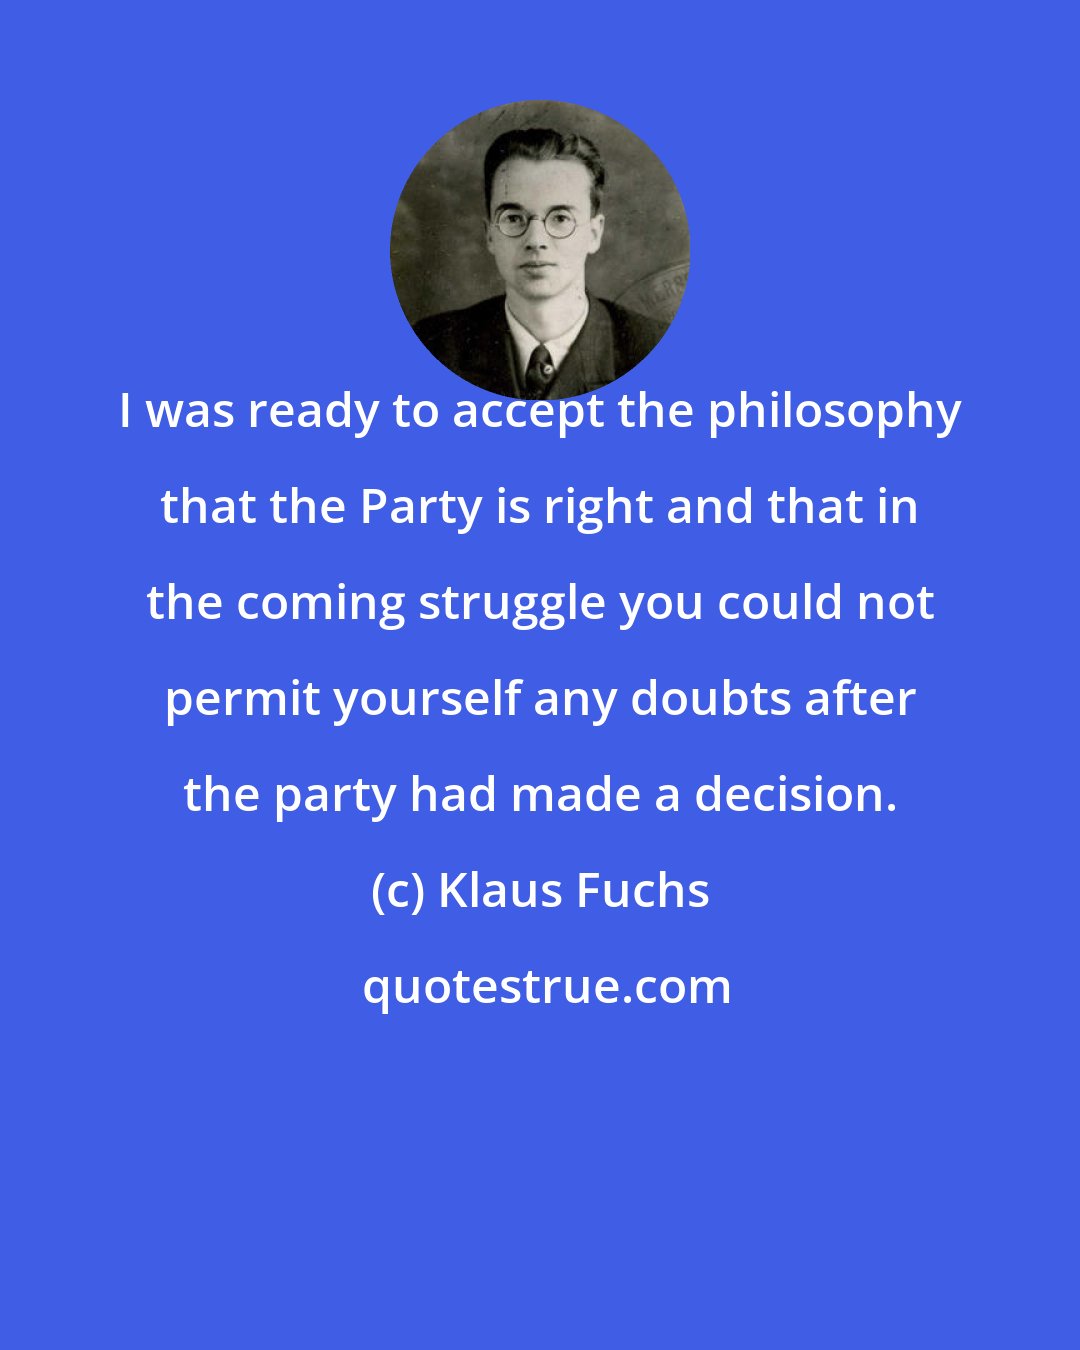 Klaus Fuchs: I was ready to accept the philosophy that the Party is right and that in the coming struggle you could not permit yourself any doubts after the party had made a decision.